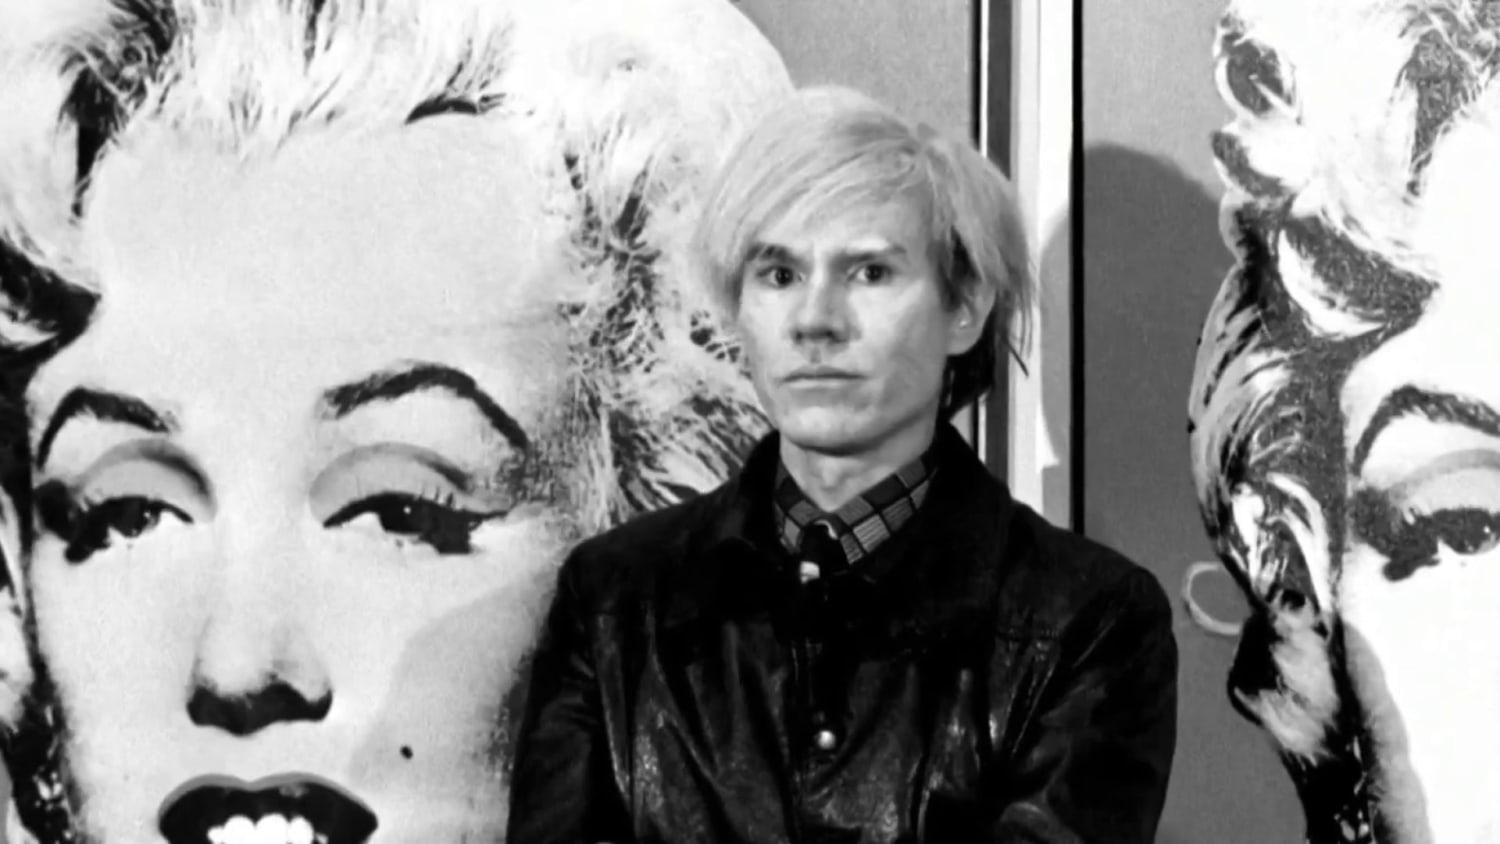 Andy Warhol's Marilyn Monroe portrait sells for record $195 million at  auction